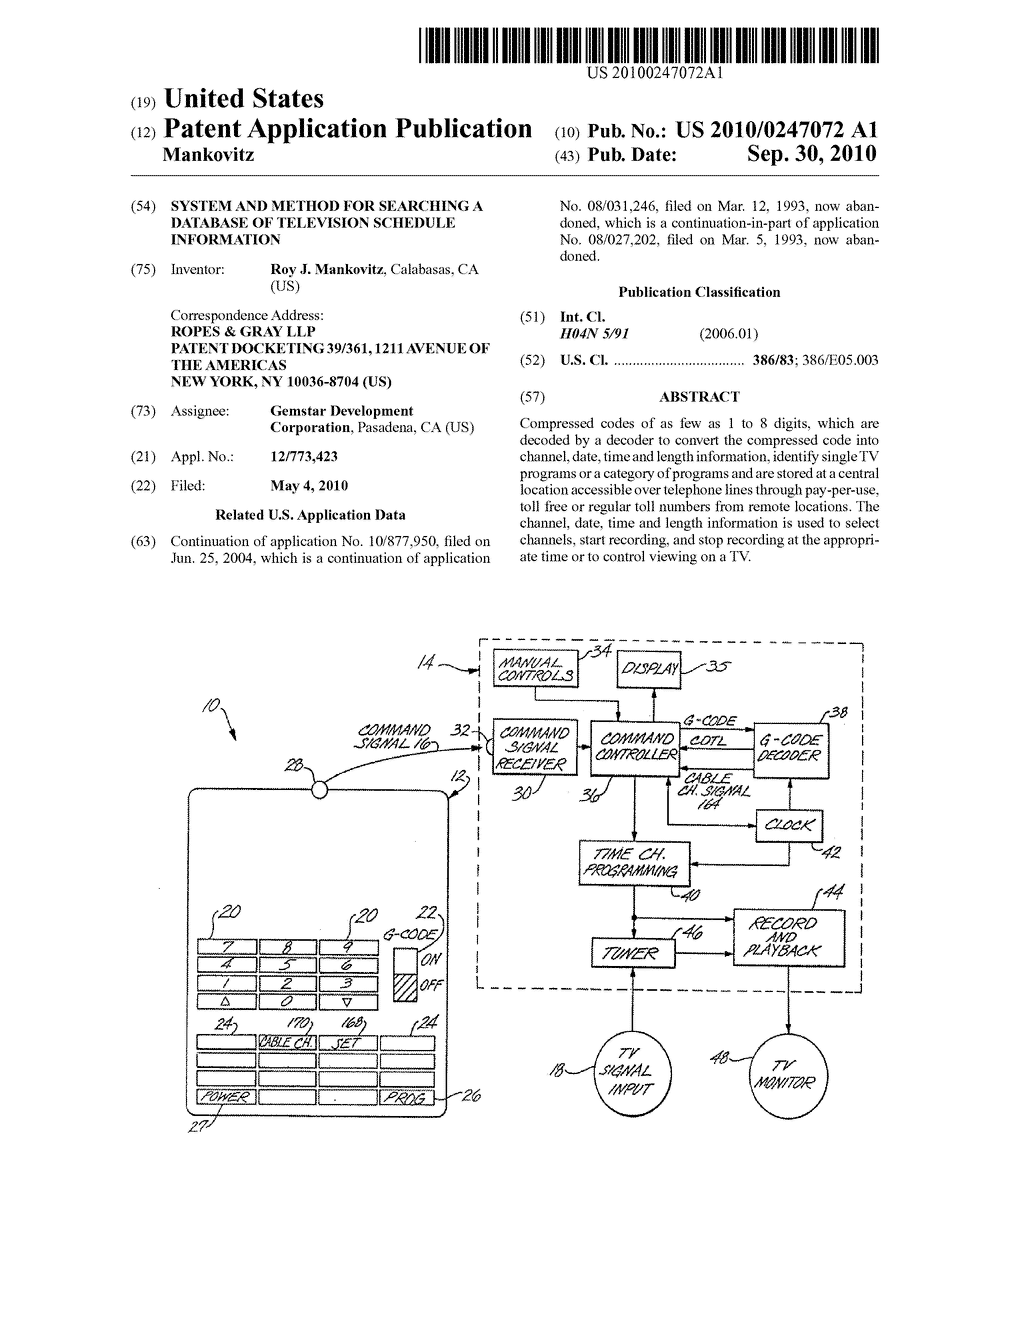 SYSTEM AND METHOD FOR SEARCHING A DATABASE OF TELEVISION SCHEDULE INFORMATION - diagram, schematic, and image 01